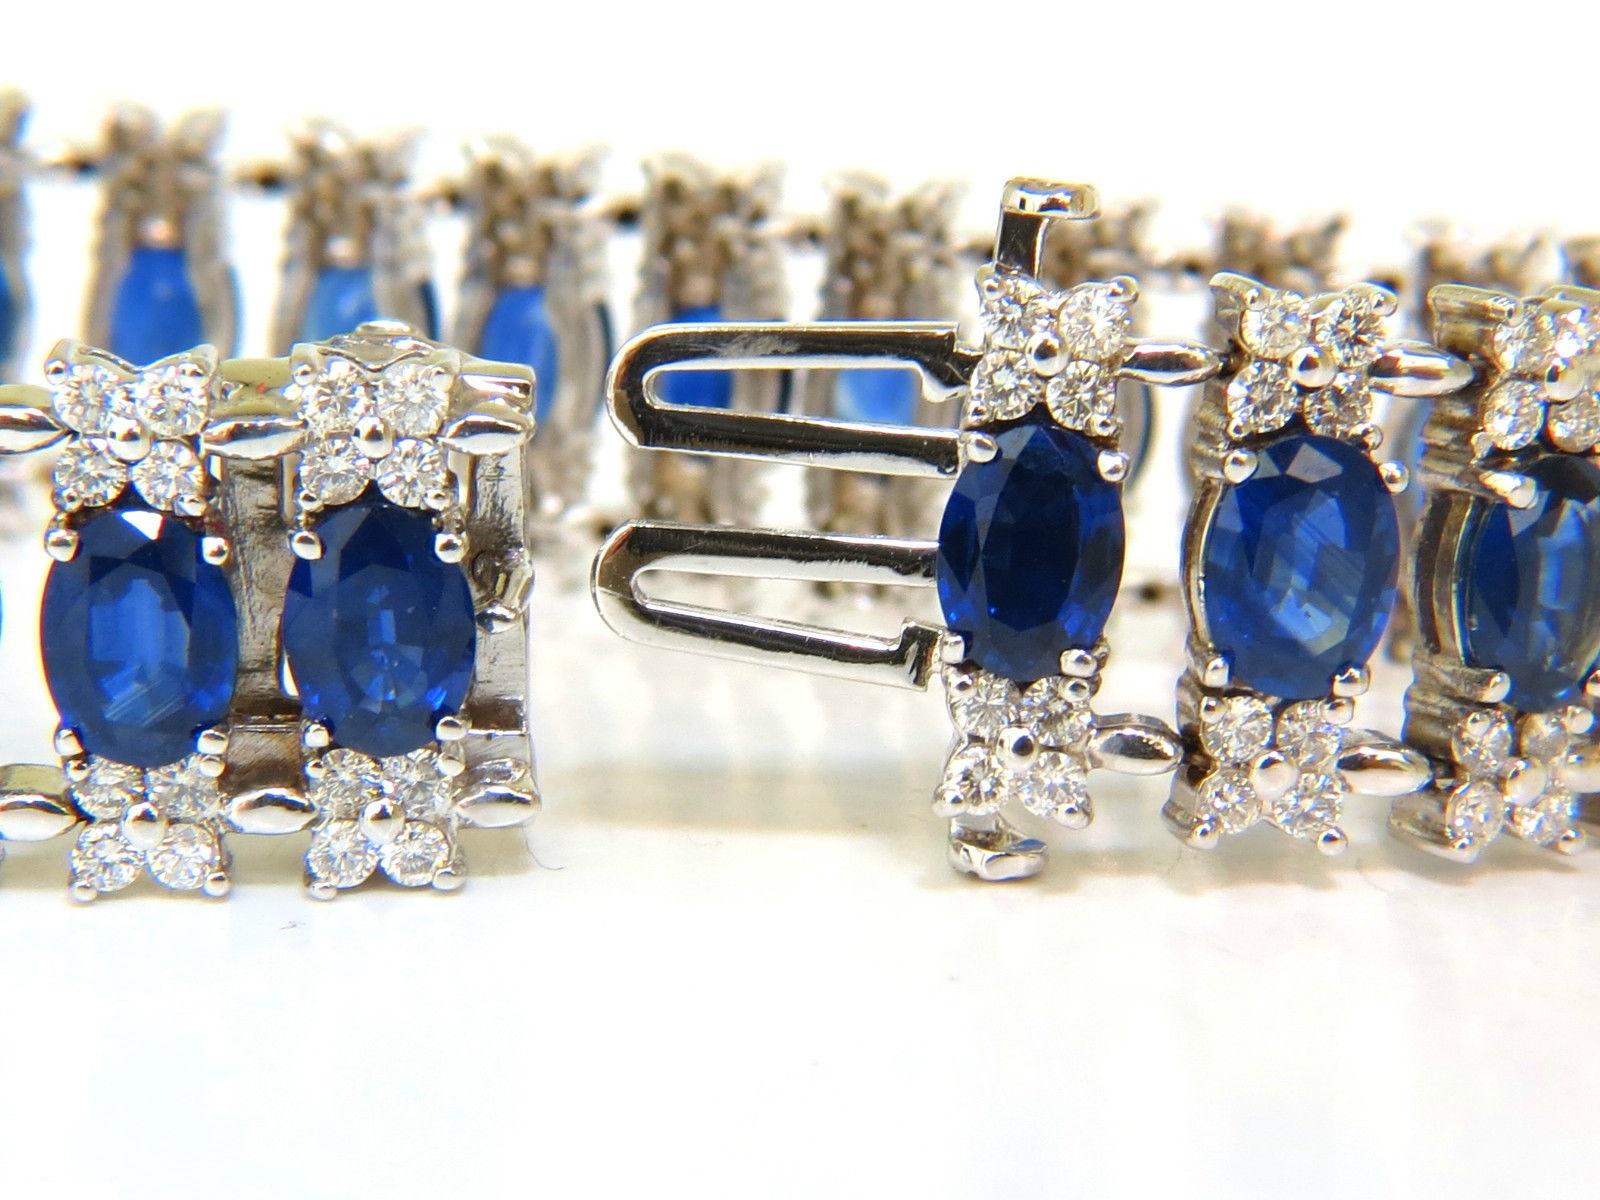 33.75 Carat Natural Gem Sapphire Diamond Bracelet Three-Row and Wide Cuff For Sale 4